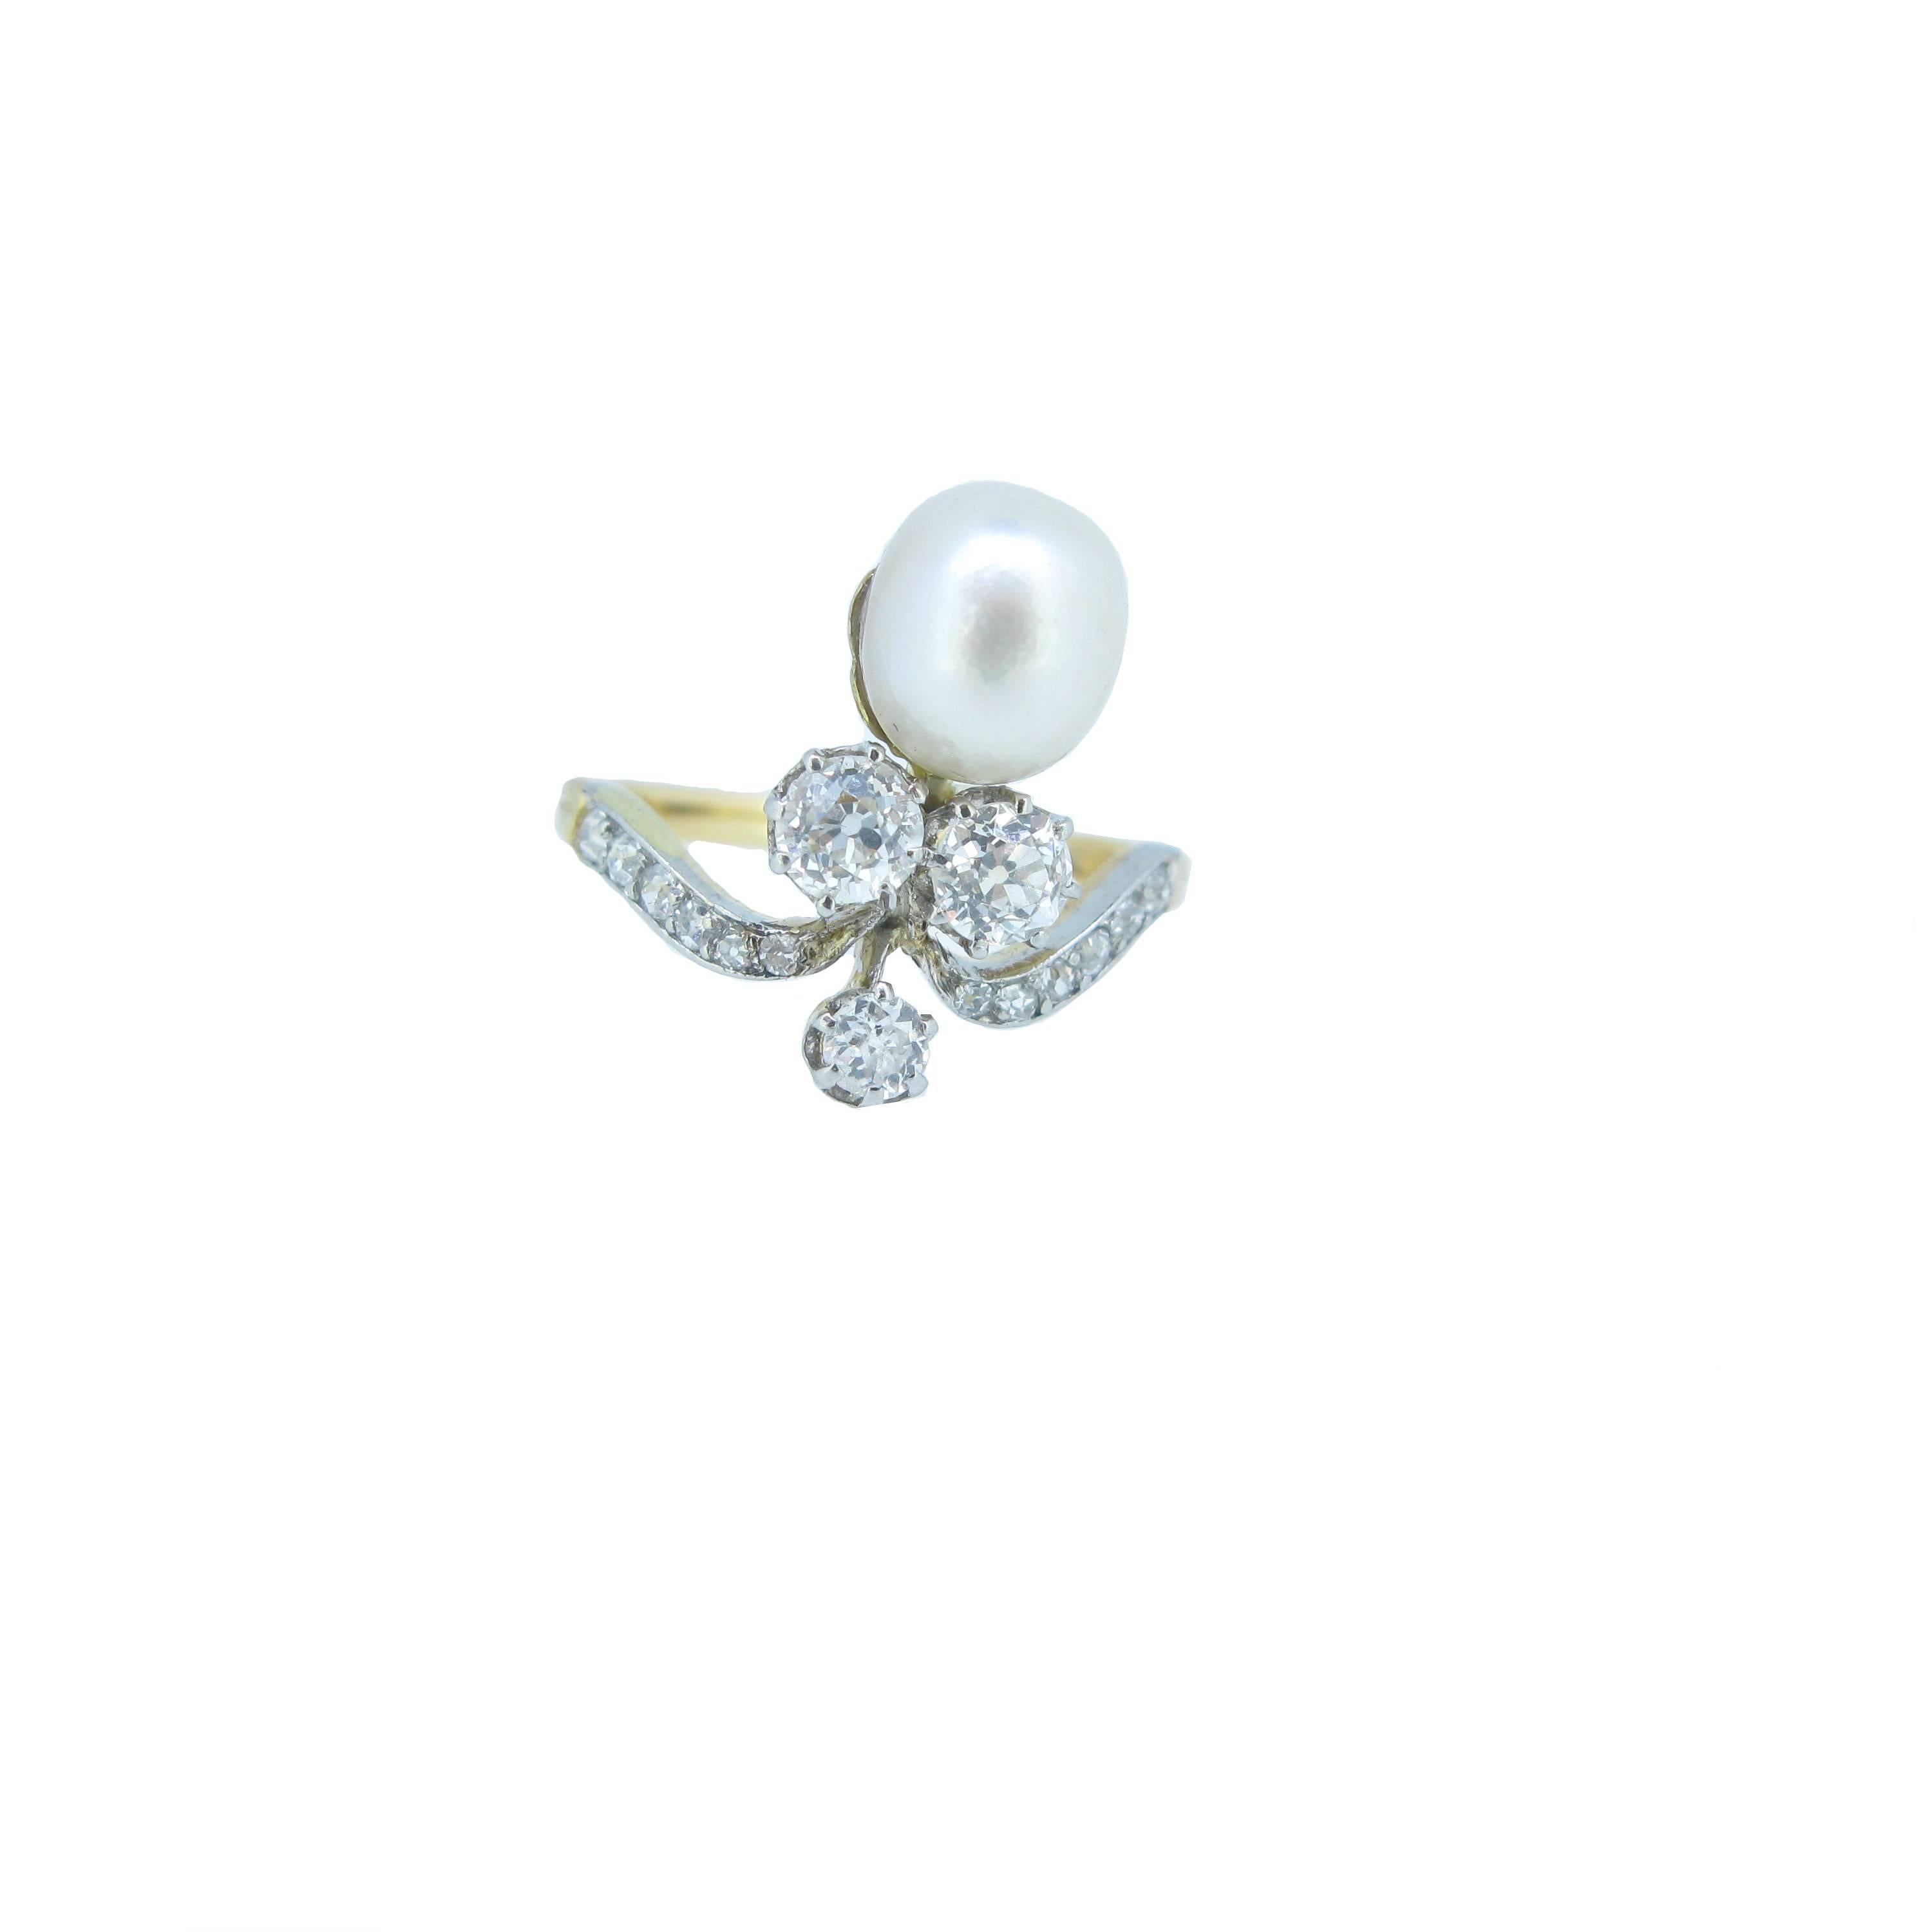 This elegant ring features three Old European cut diamonds and a natural pearl . The diamonds weighs approximately in total 0.80ct with colour H/I and clarity VS/SI.
The pearl and the diamond are set in platinum prongs and the ring is made in 18kt